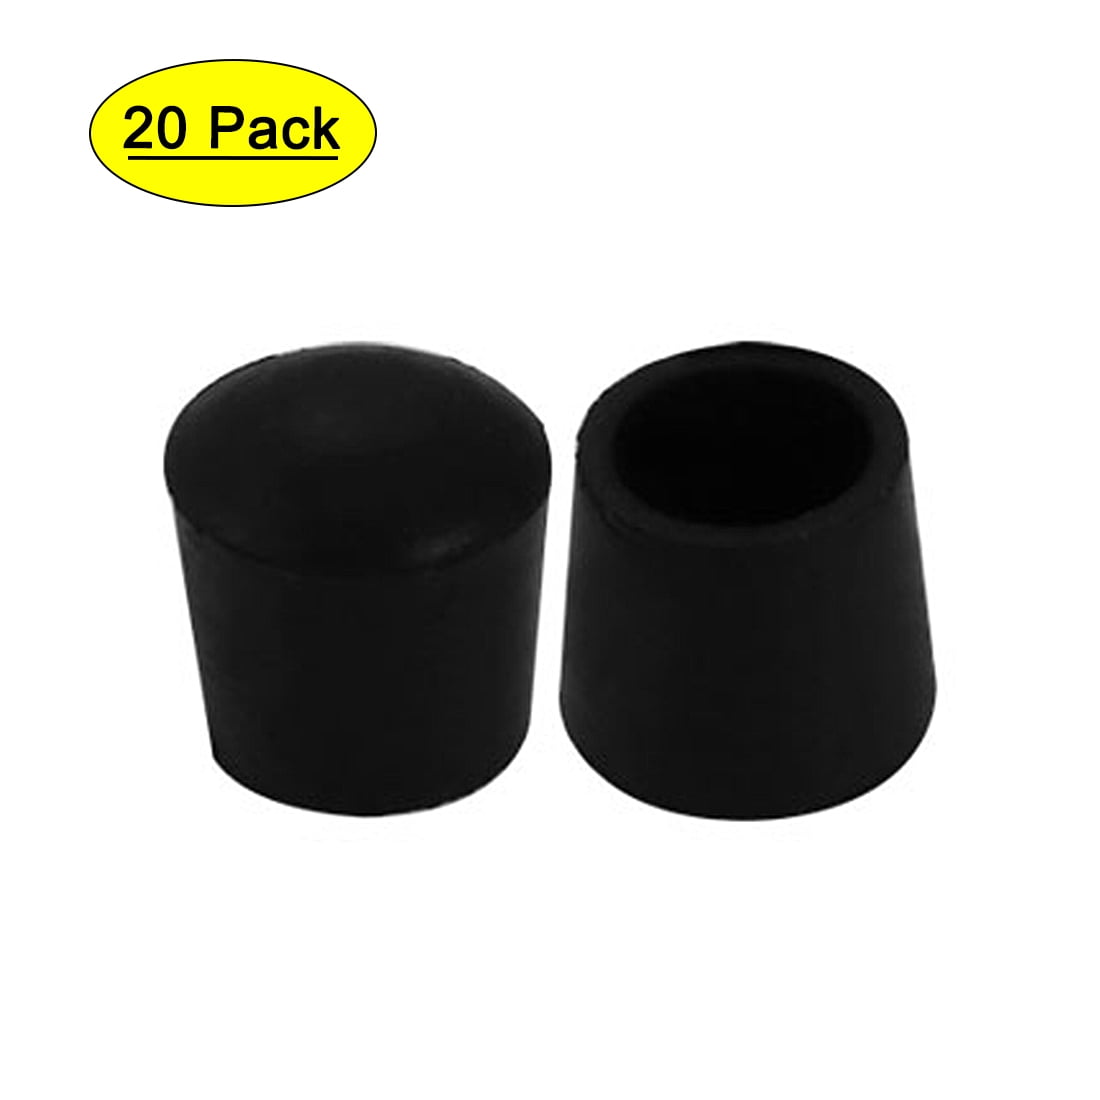 12 Vinyl End Caps Plastic tips 9/16" Inside Diam X 1/2" Height Hard To Find Size 